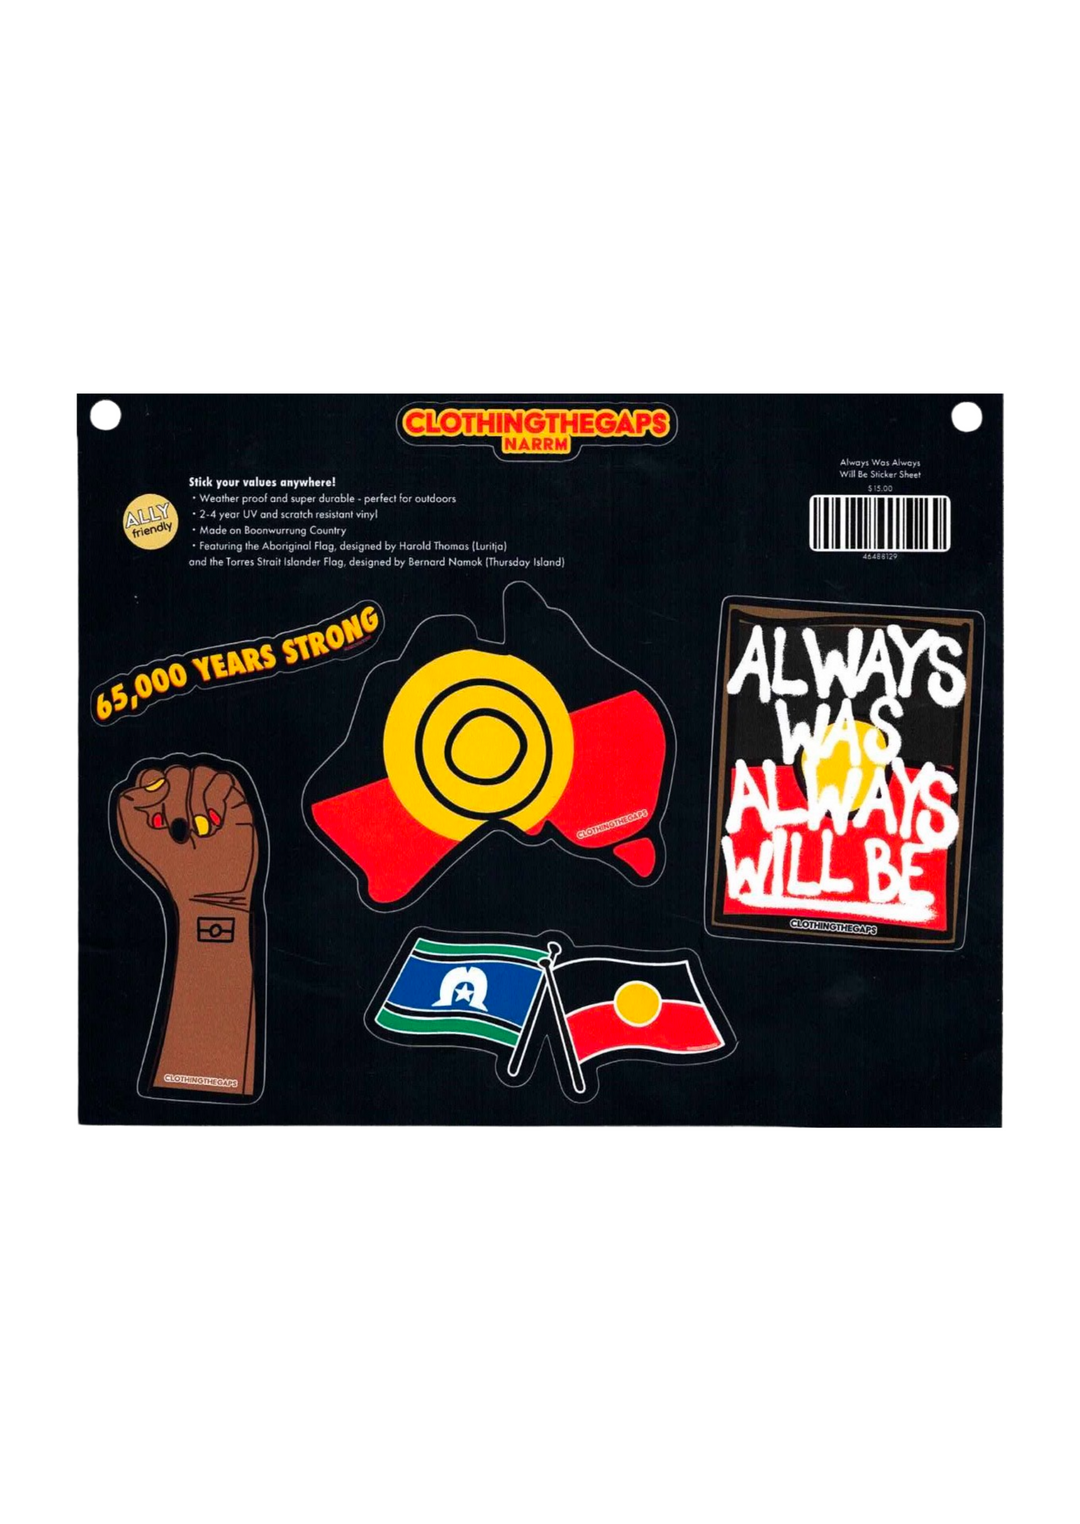 Always Was Always Will Be Sticker Pack Clothing The Gaps. Aboriginal Flag and Torres Strait Islander flags. 65,000 years strong. 